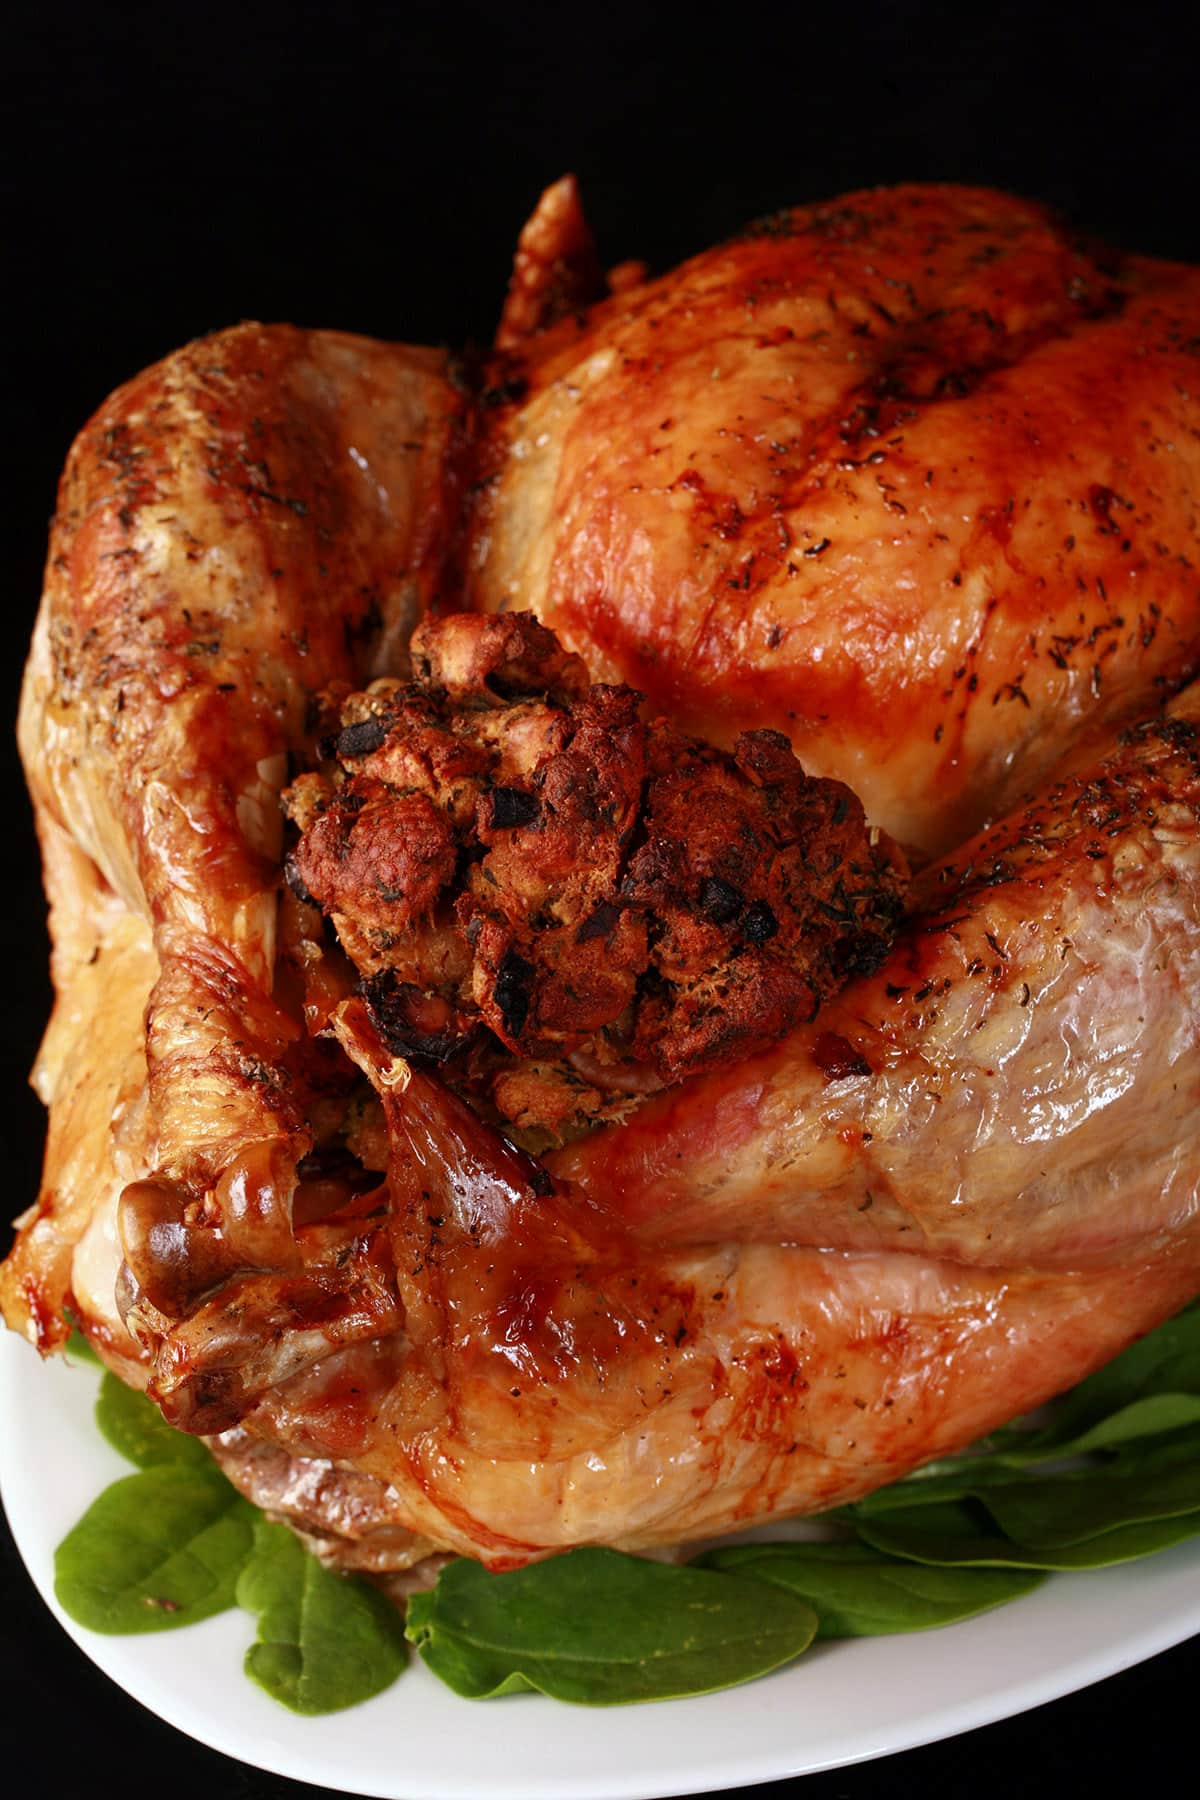 A close up photo of a roasted turkey with chestnut stuffing.